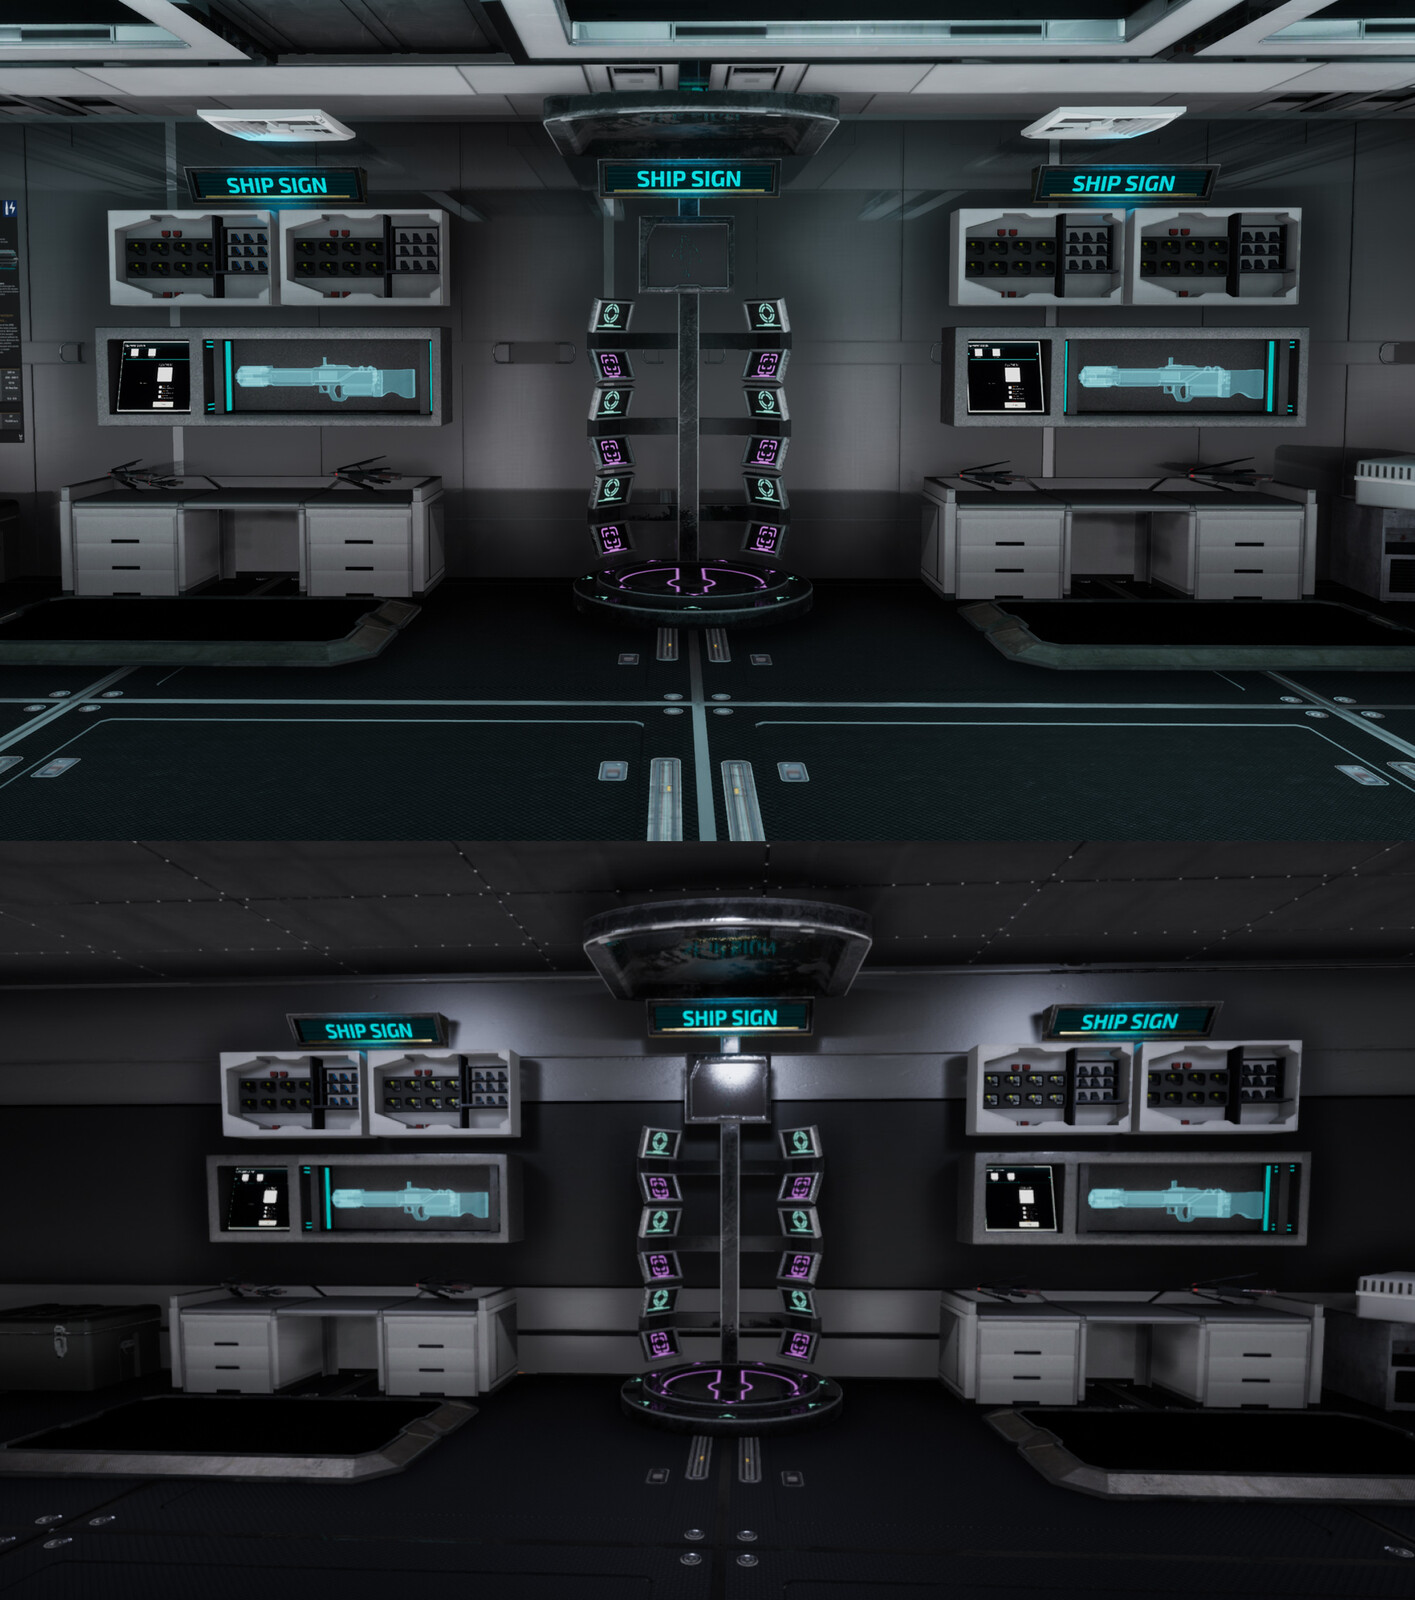 Spaceship's armory where players build upgrades. Updated lighting and materials on a few assets, intended to better direct player's attention to the stations with upgrades